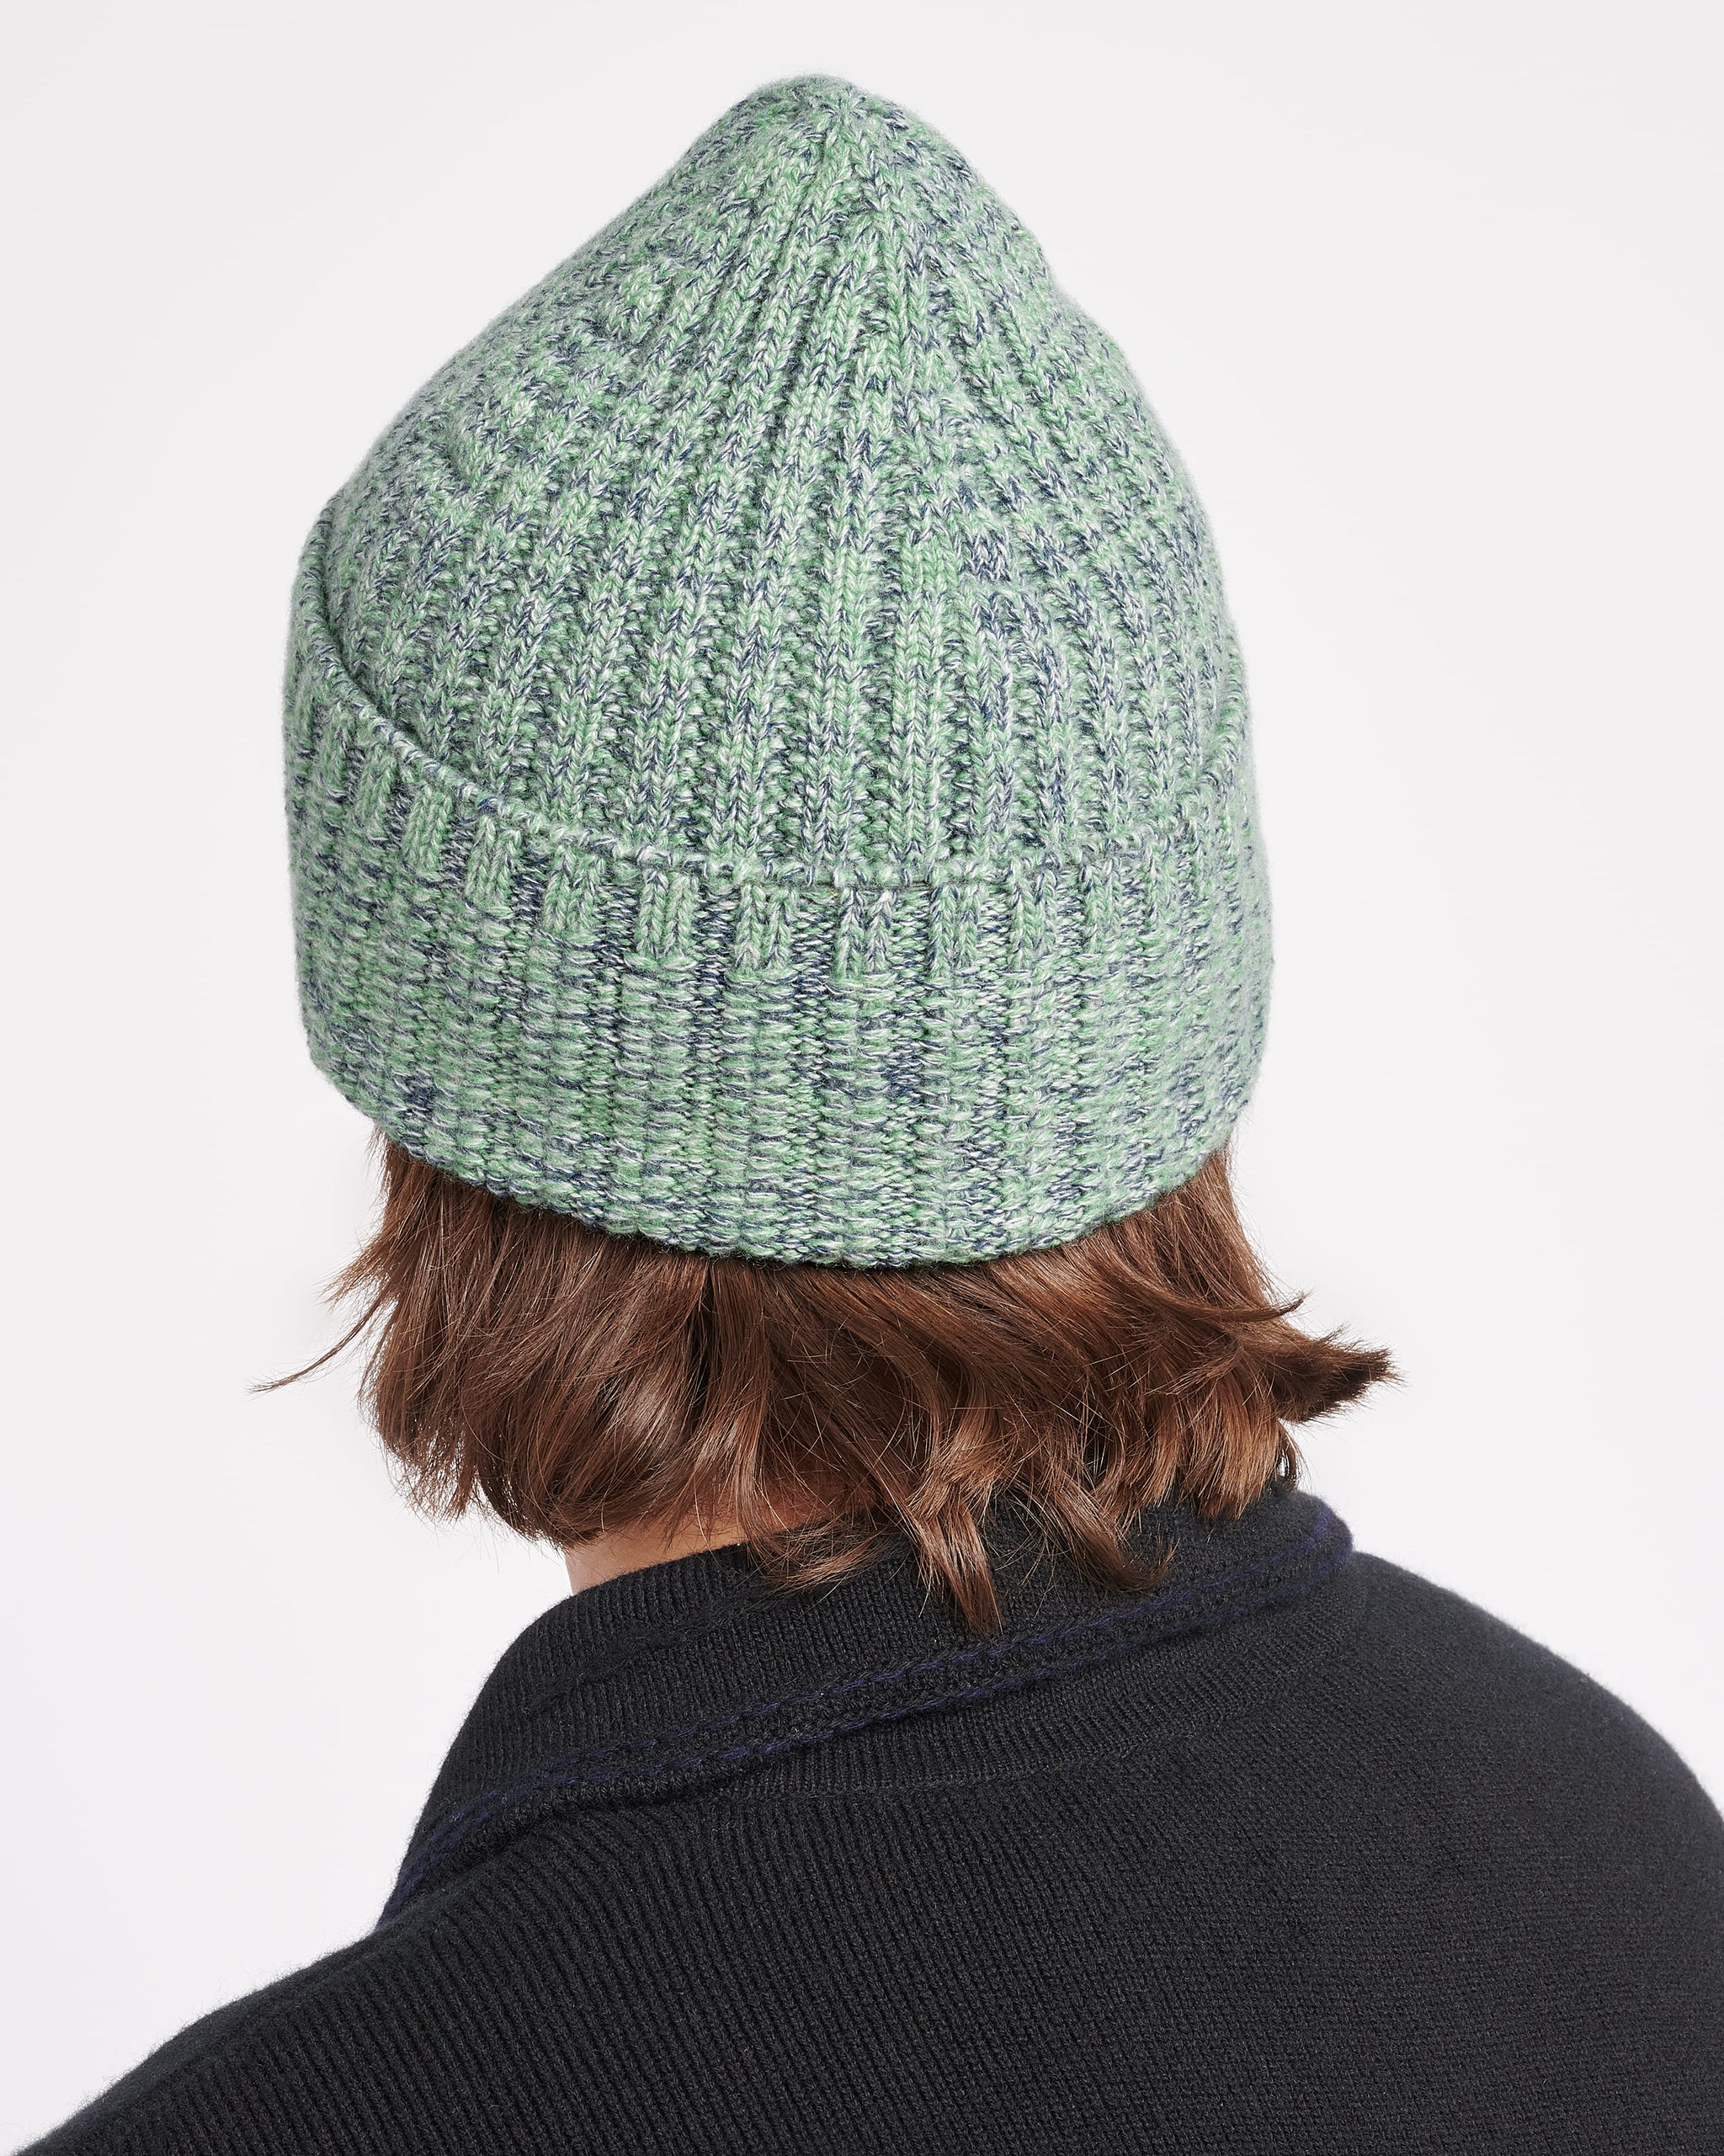 Cashmere Beanie Hats for Men - Made in Scotland